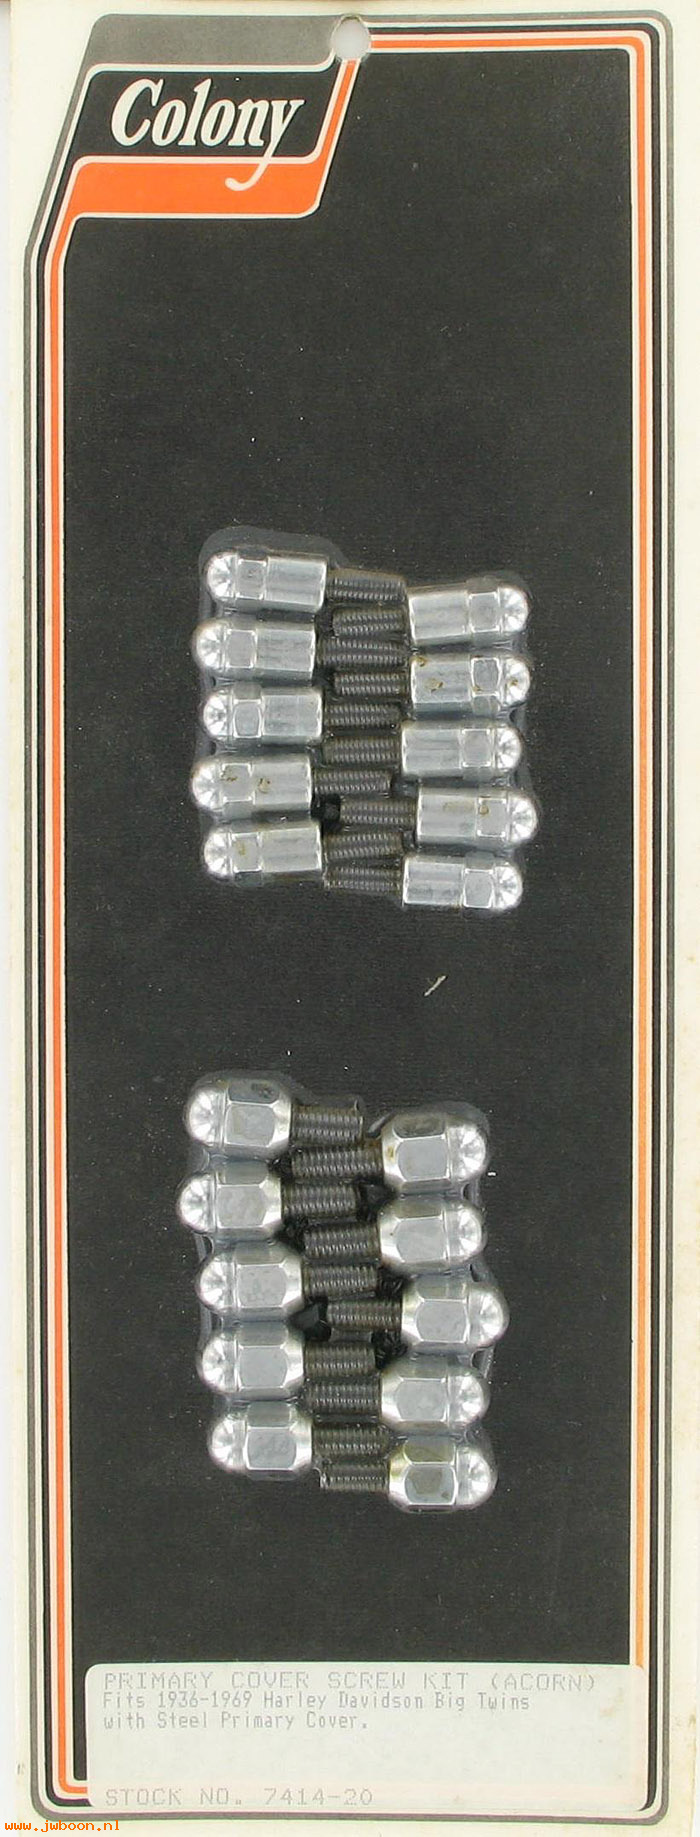 C 7414-20 (): Primary cover screws - Big Twins '36-'64, in stock, Colony